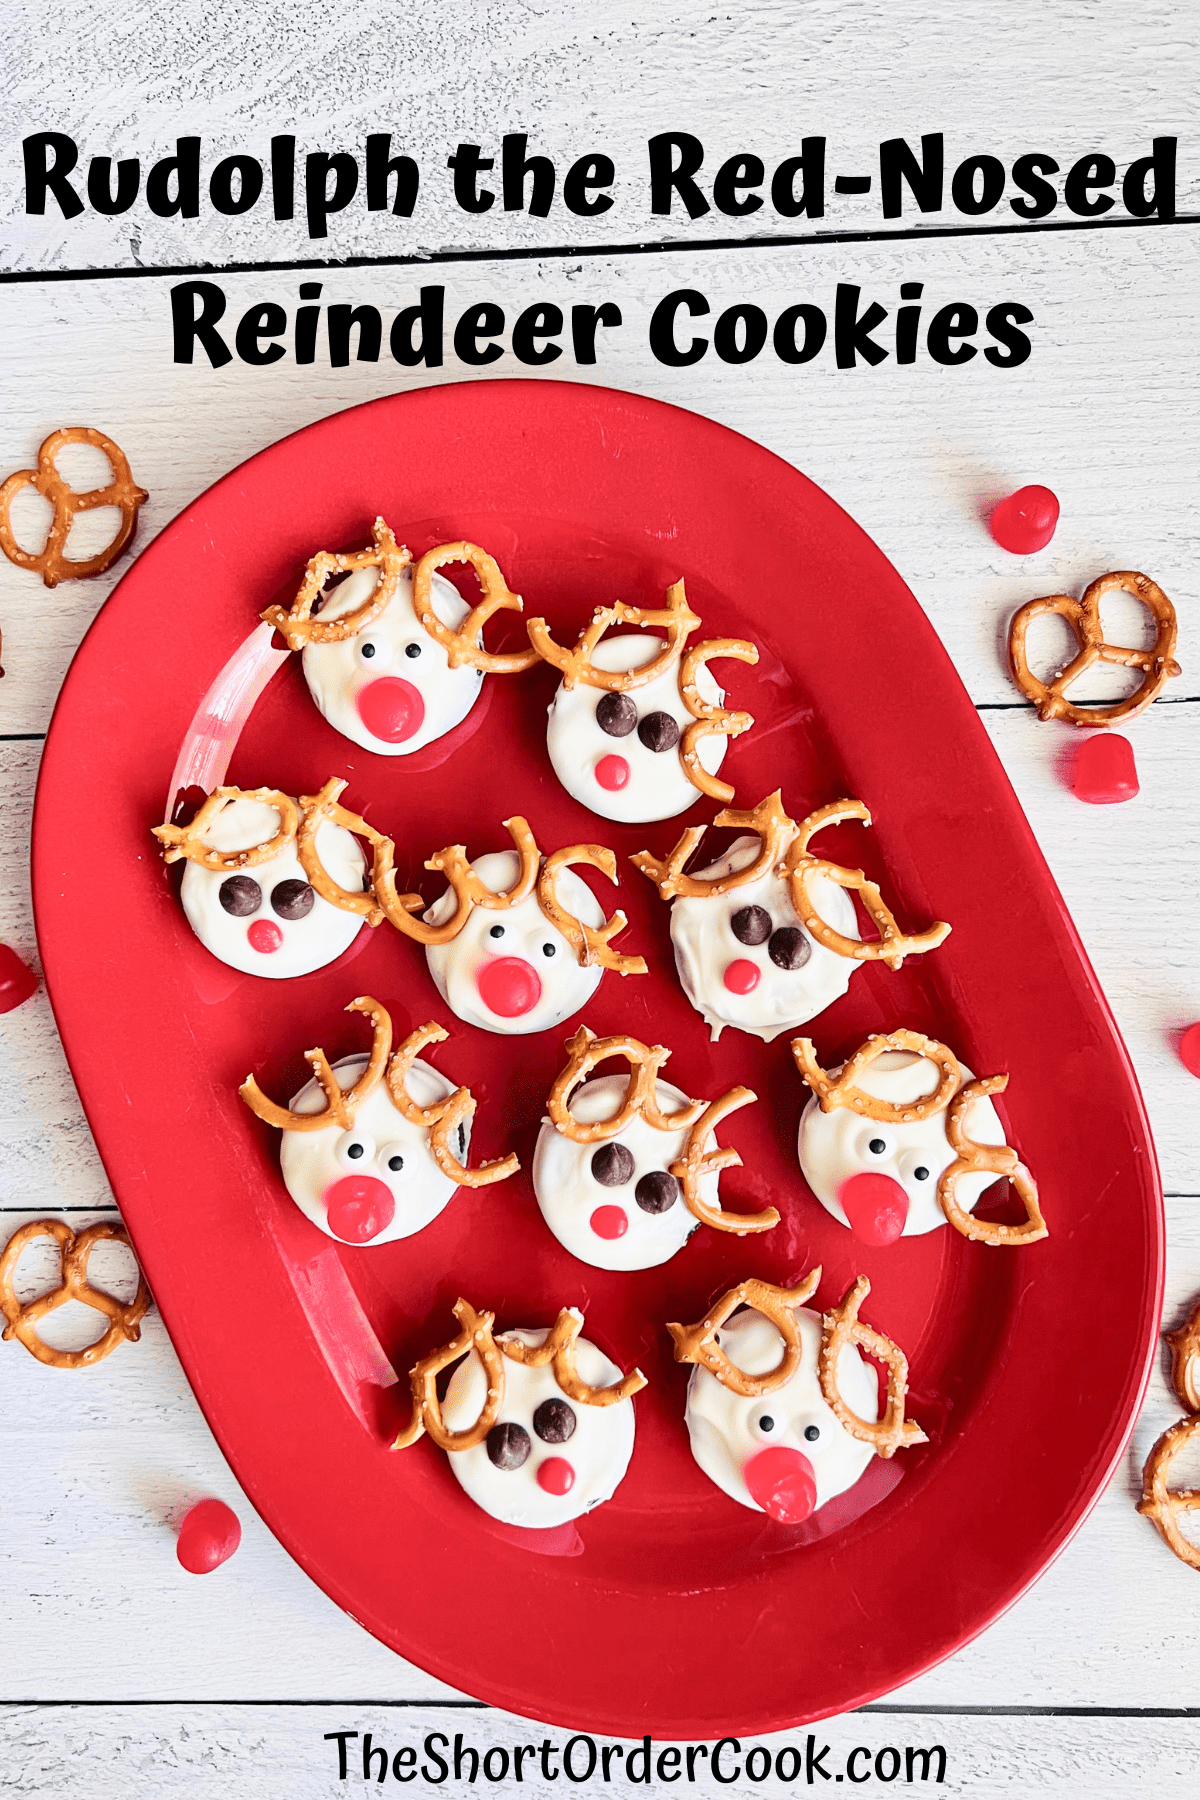 Rudolph the Red-Nosed Reindeer Cookies on a red holiday platter.